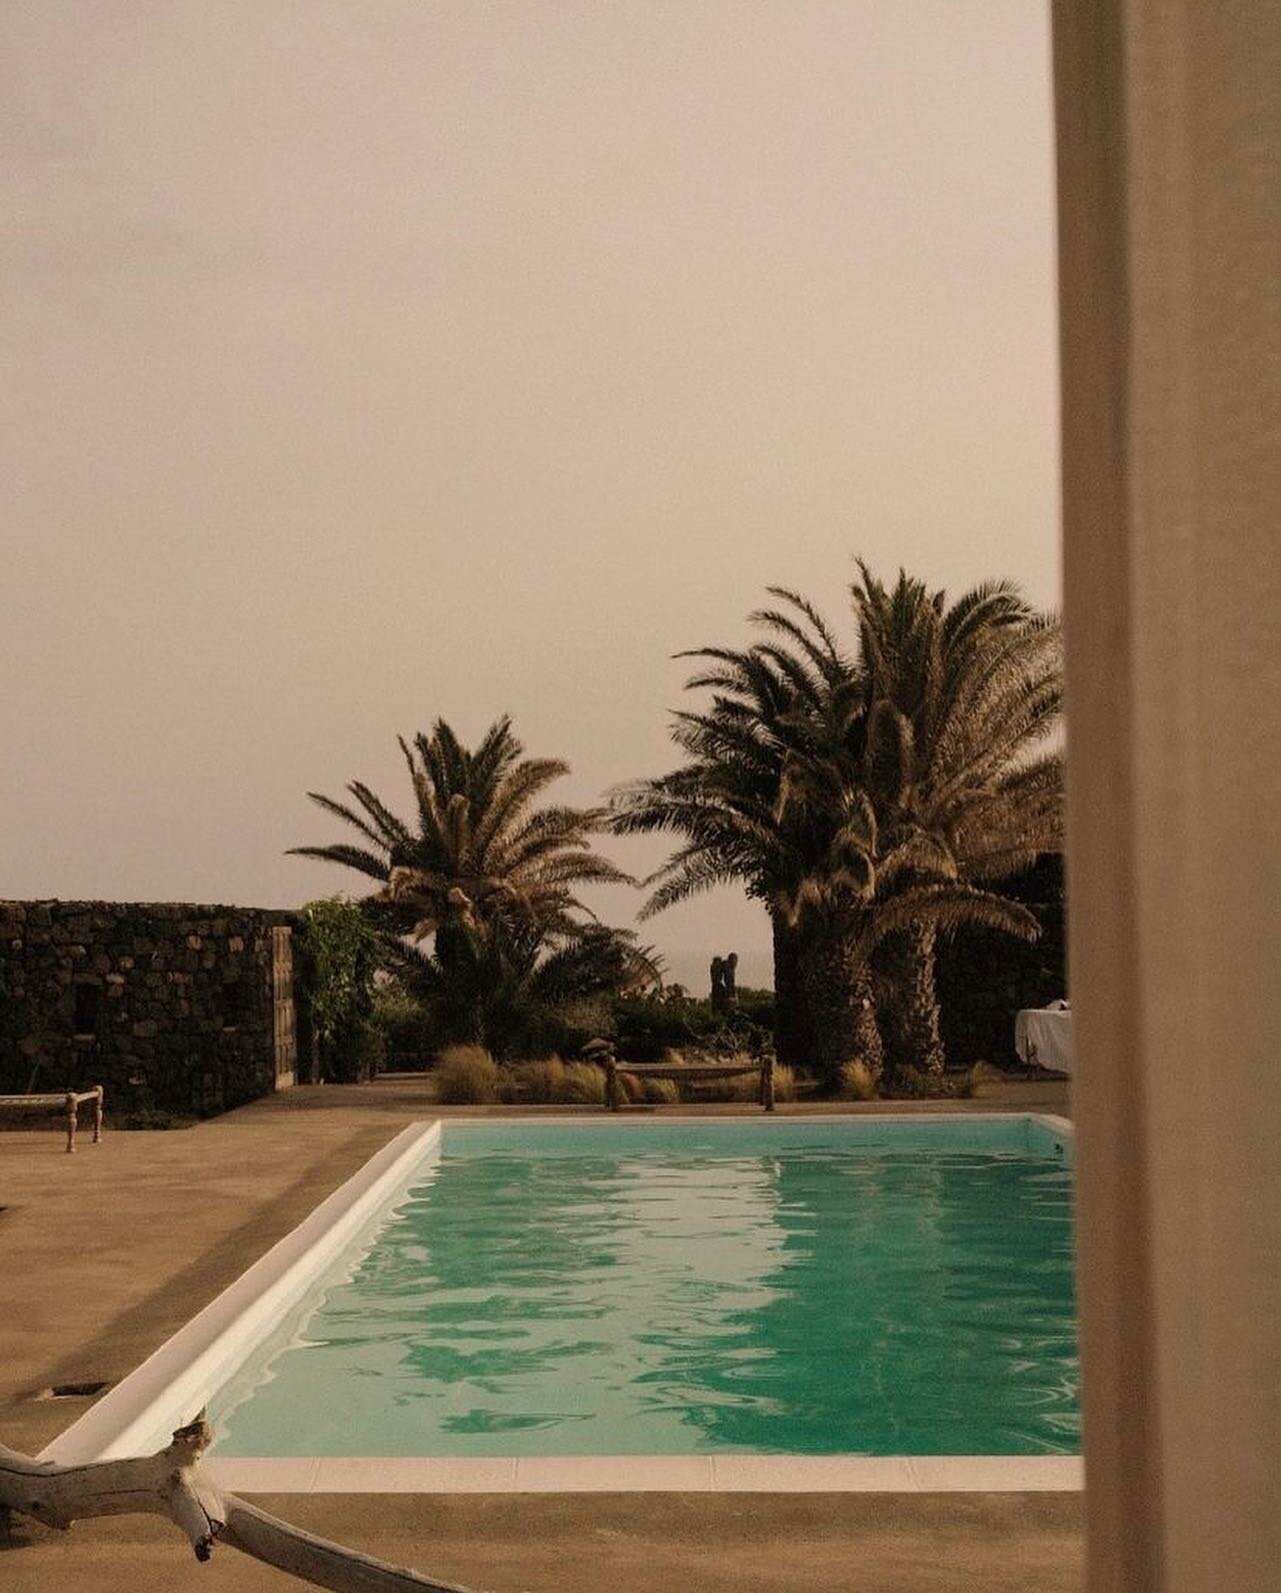 Did you know @weare_wakingdreams are going back to the magical island of Pantelleria and staying at the stunning @parcodeisesi June 5-11 🌞

This island just off Sicily shares a climate much like its North-African neighbours with fumaroles, a sea wit